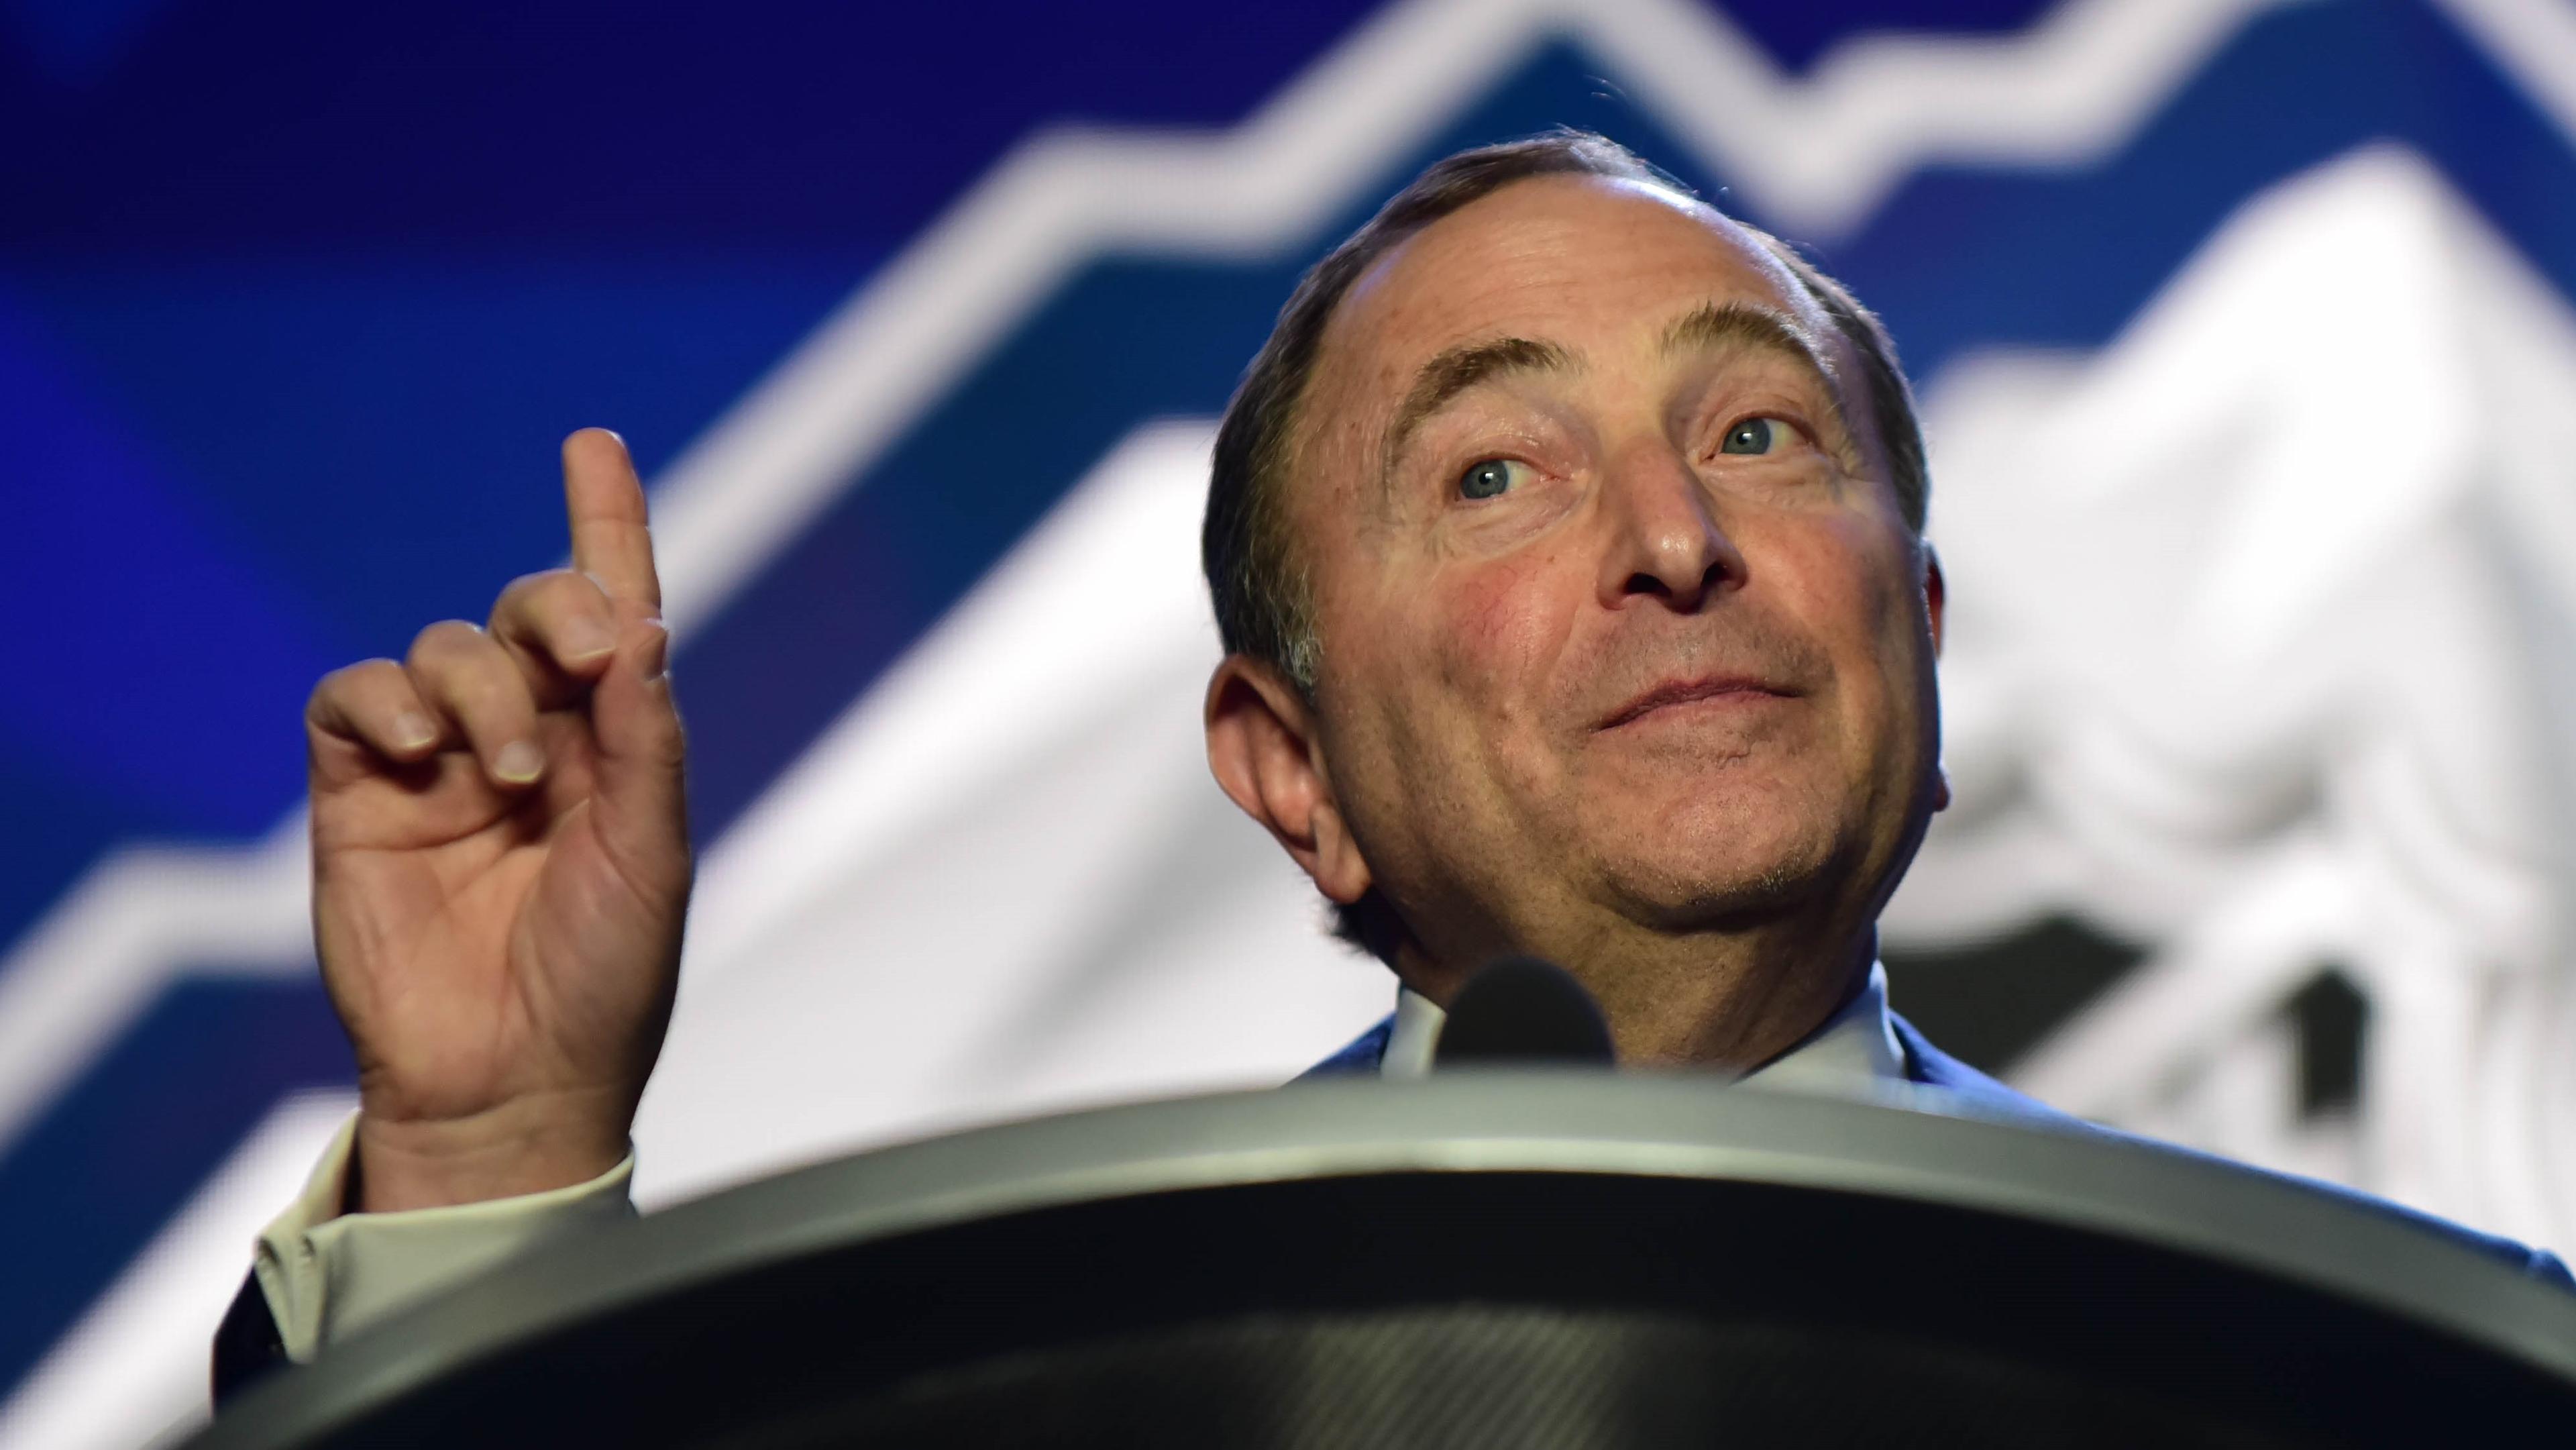 Jun 21, 2019; Vancouver, BC, Canada; NHL commissioner Gary Bettman speaks before the first round of the 2019 NHL Draft at Rogers Arena. Mandatory Credit: Anne-Marie Sorvin-USA TODAY Sports / © Anne-Marie Sorvin-USA TODAY Sports